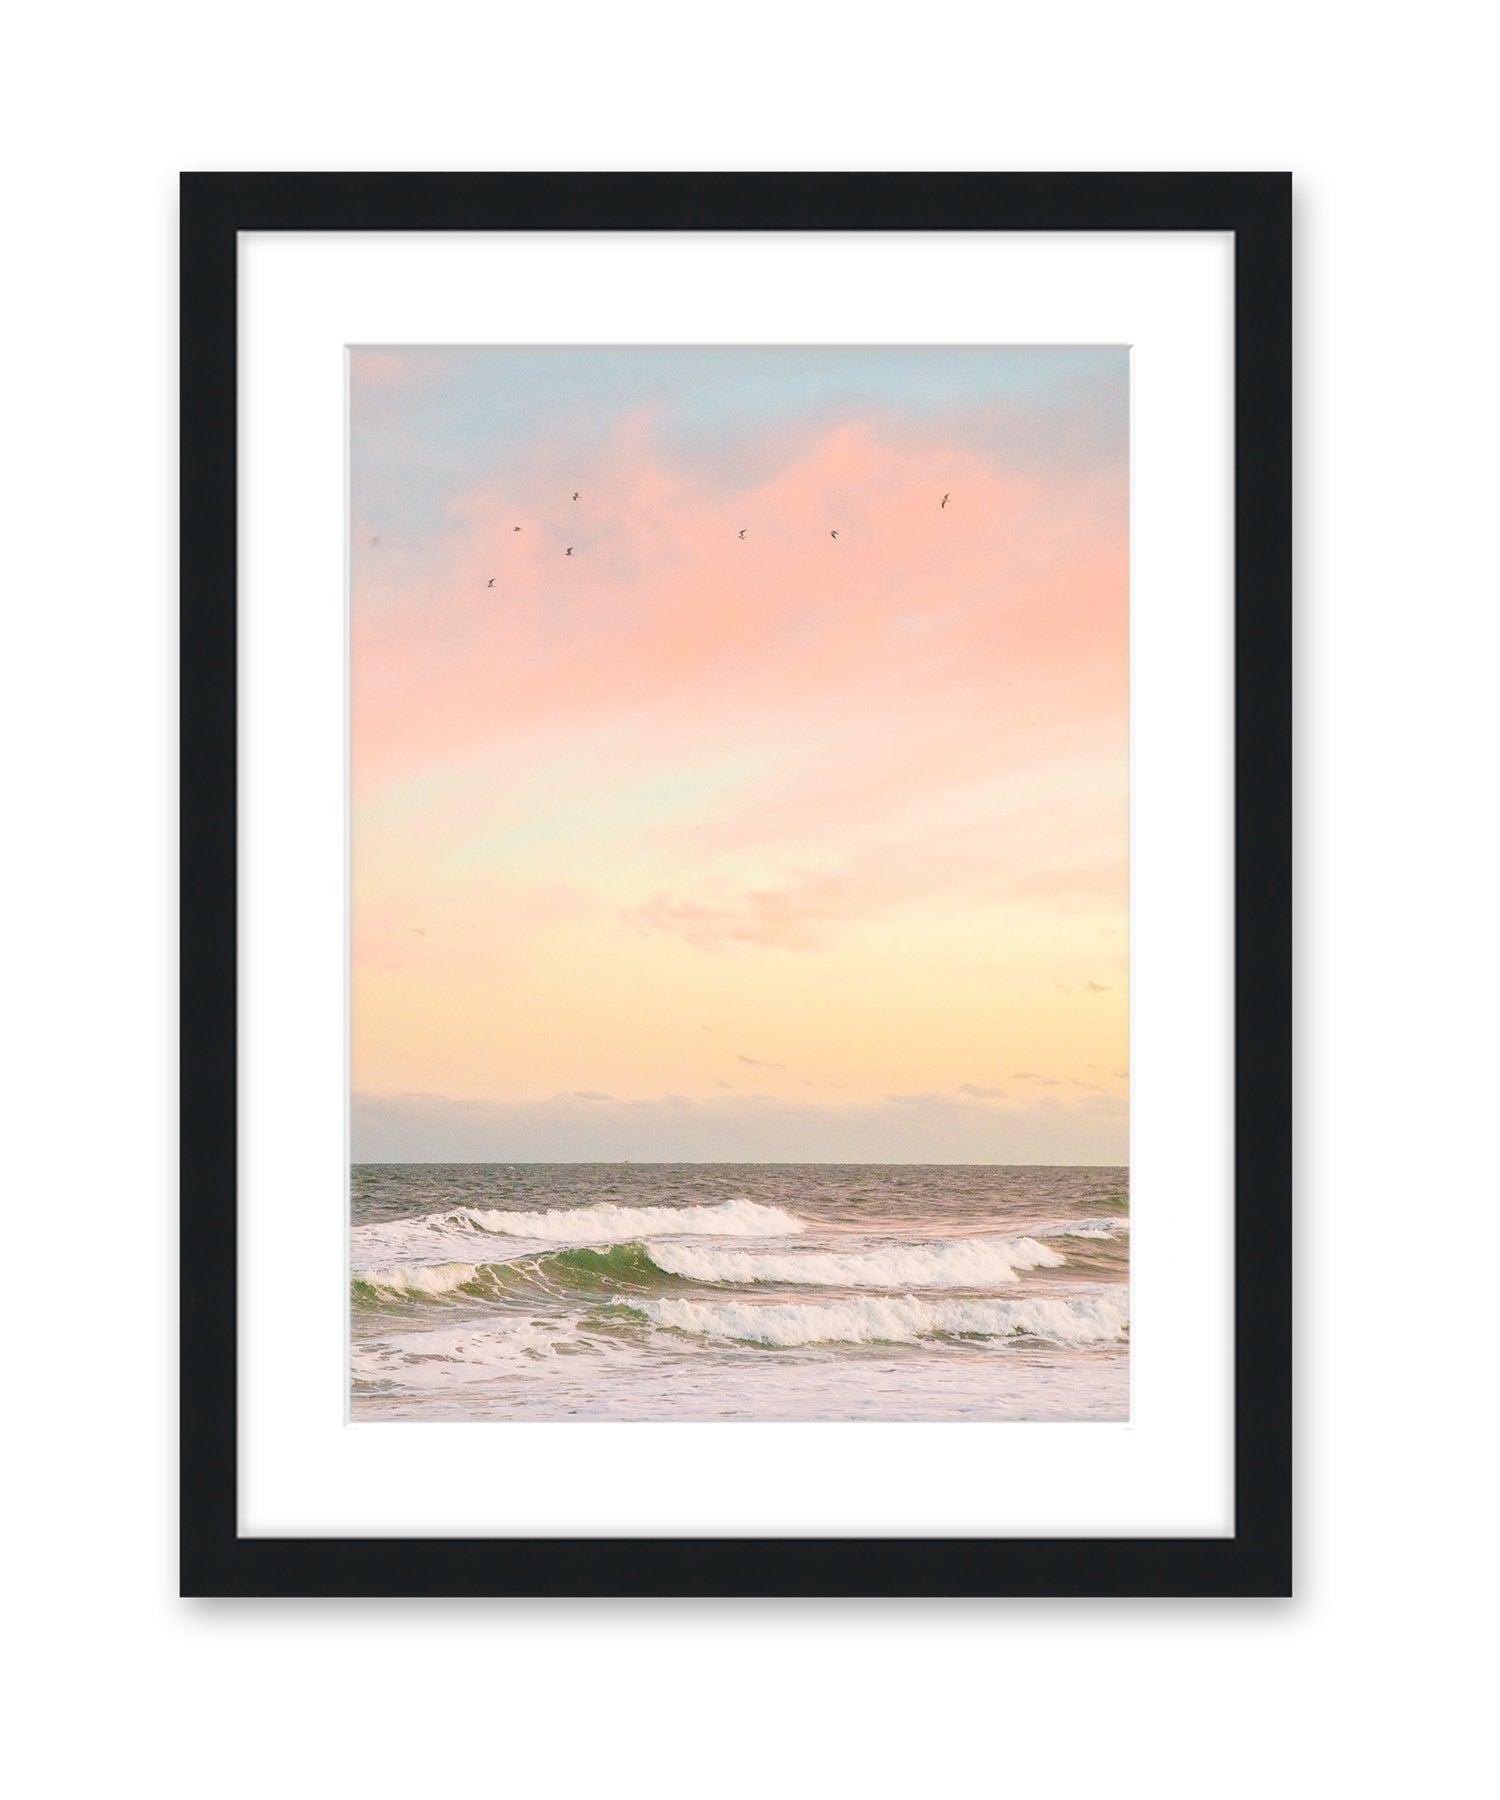 Pastel Warm Sunset Wrightsville Beach Photograph, Black Frame by Wright and Roam